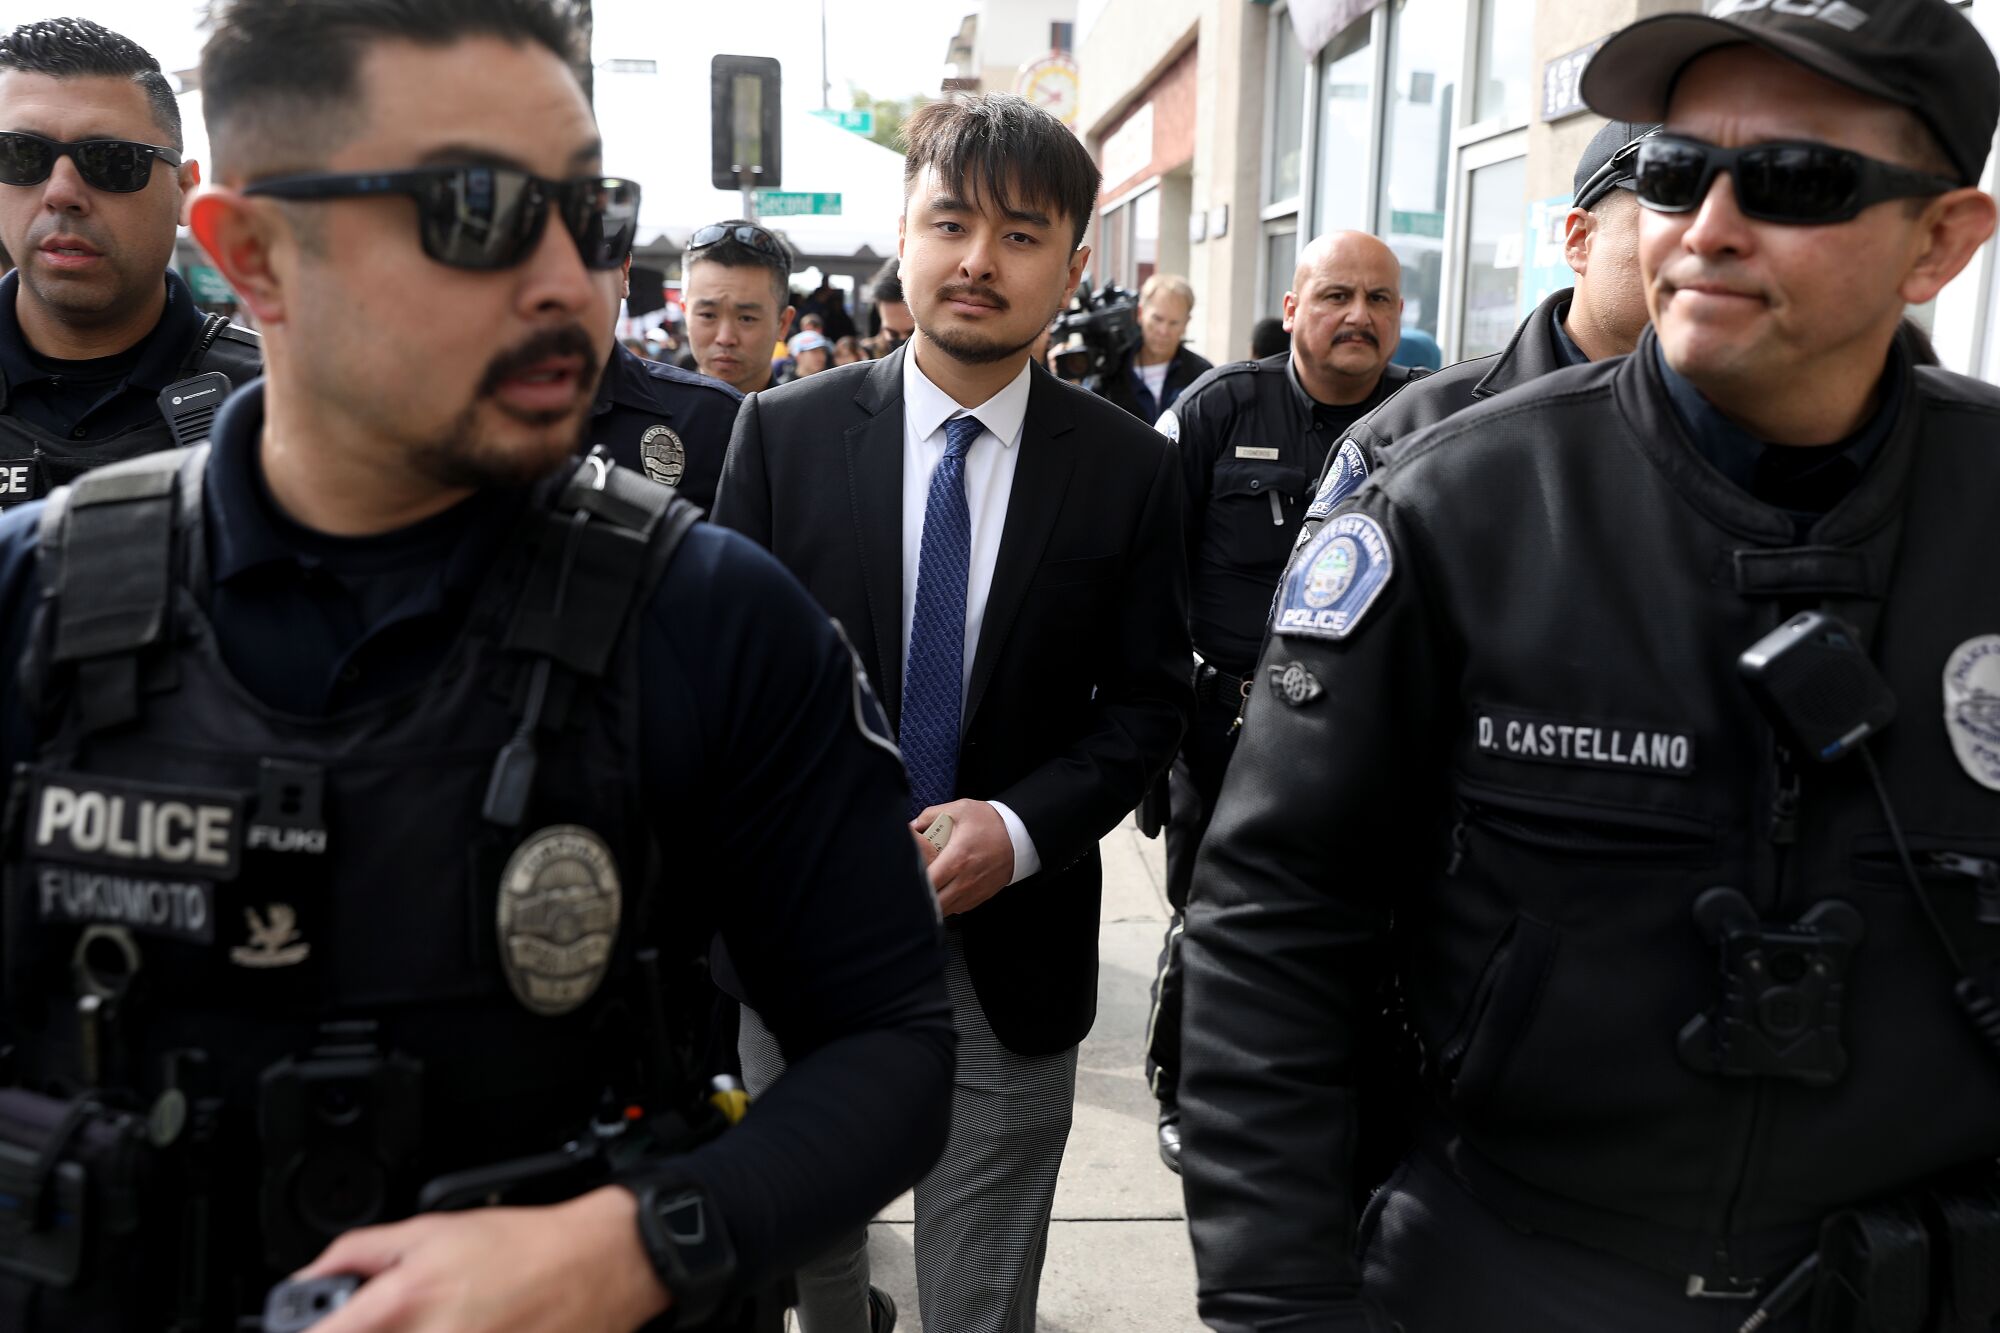 A man is surrounded by a police escort.